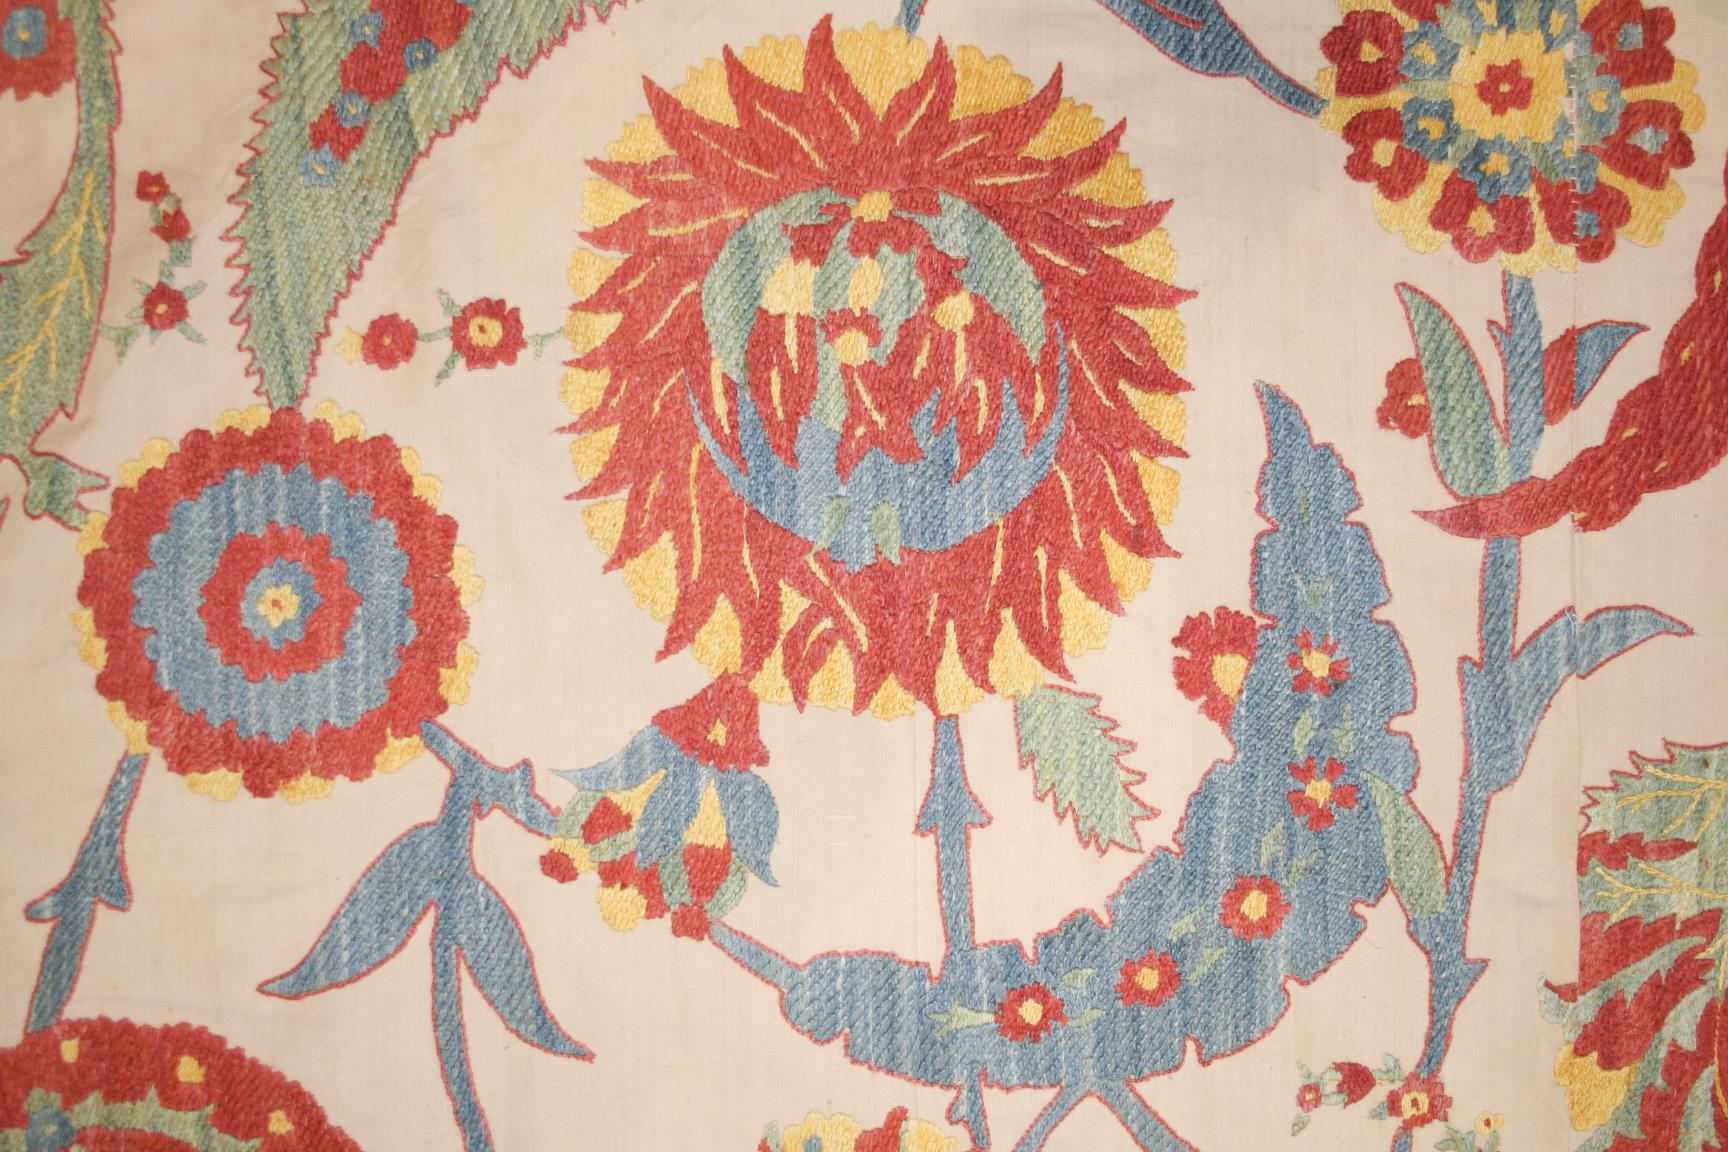 A highly refined embroidery embellished by an infinite repeat of stylised leafs and palmettes typical of 16th Century Ottoman Court workshops. It belongs to a group of weavings commissioned by a British interior designer and no longer in production.